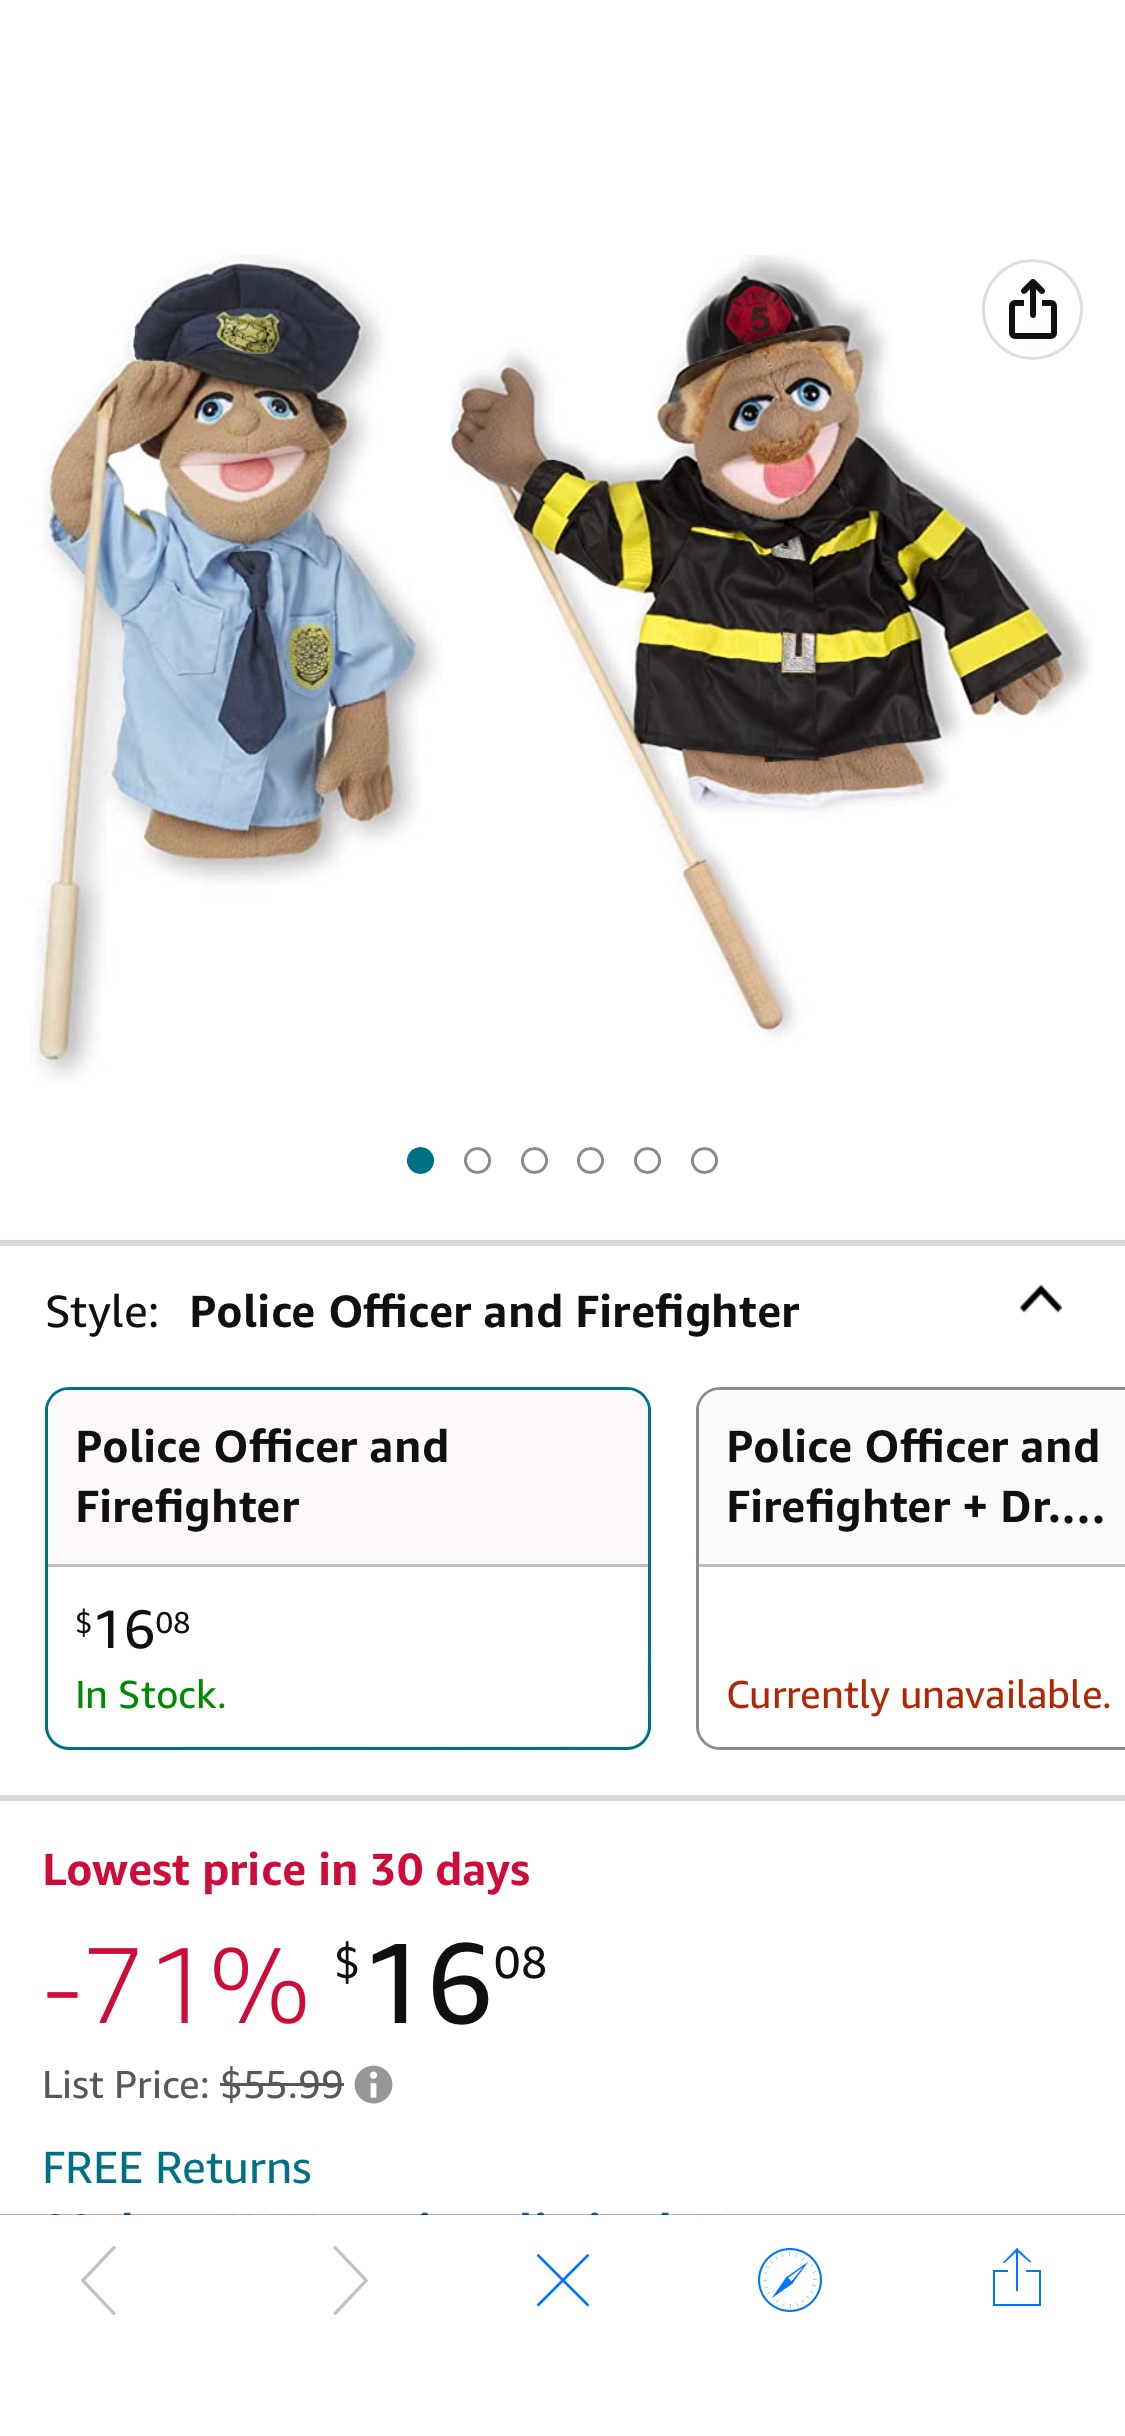 Amazon.com: Melissa & Doug Rescue Puppet Set - Police Officer and Firefighter - Soft, Plush Puppets For Kids Ages 3+ : Melissa & Doug: Everything Else